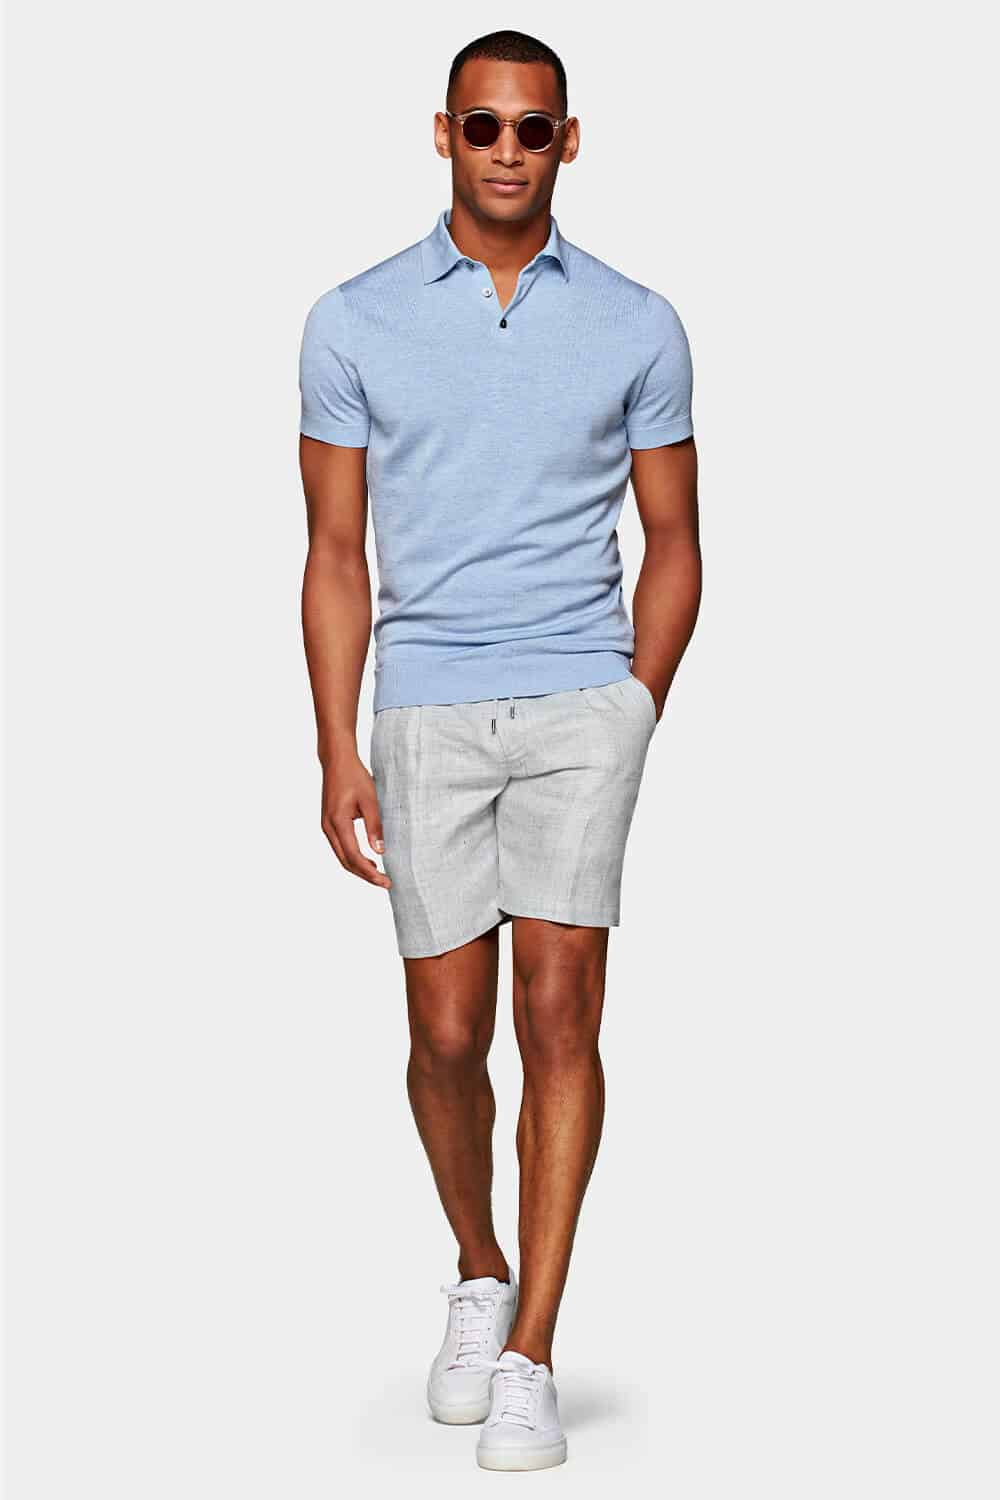 Polo Shirt Outfit Inspiration For Men: 20 Cool Looks For 2024